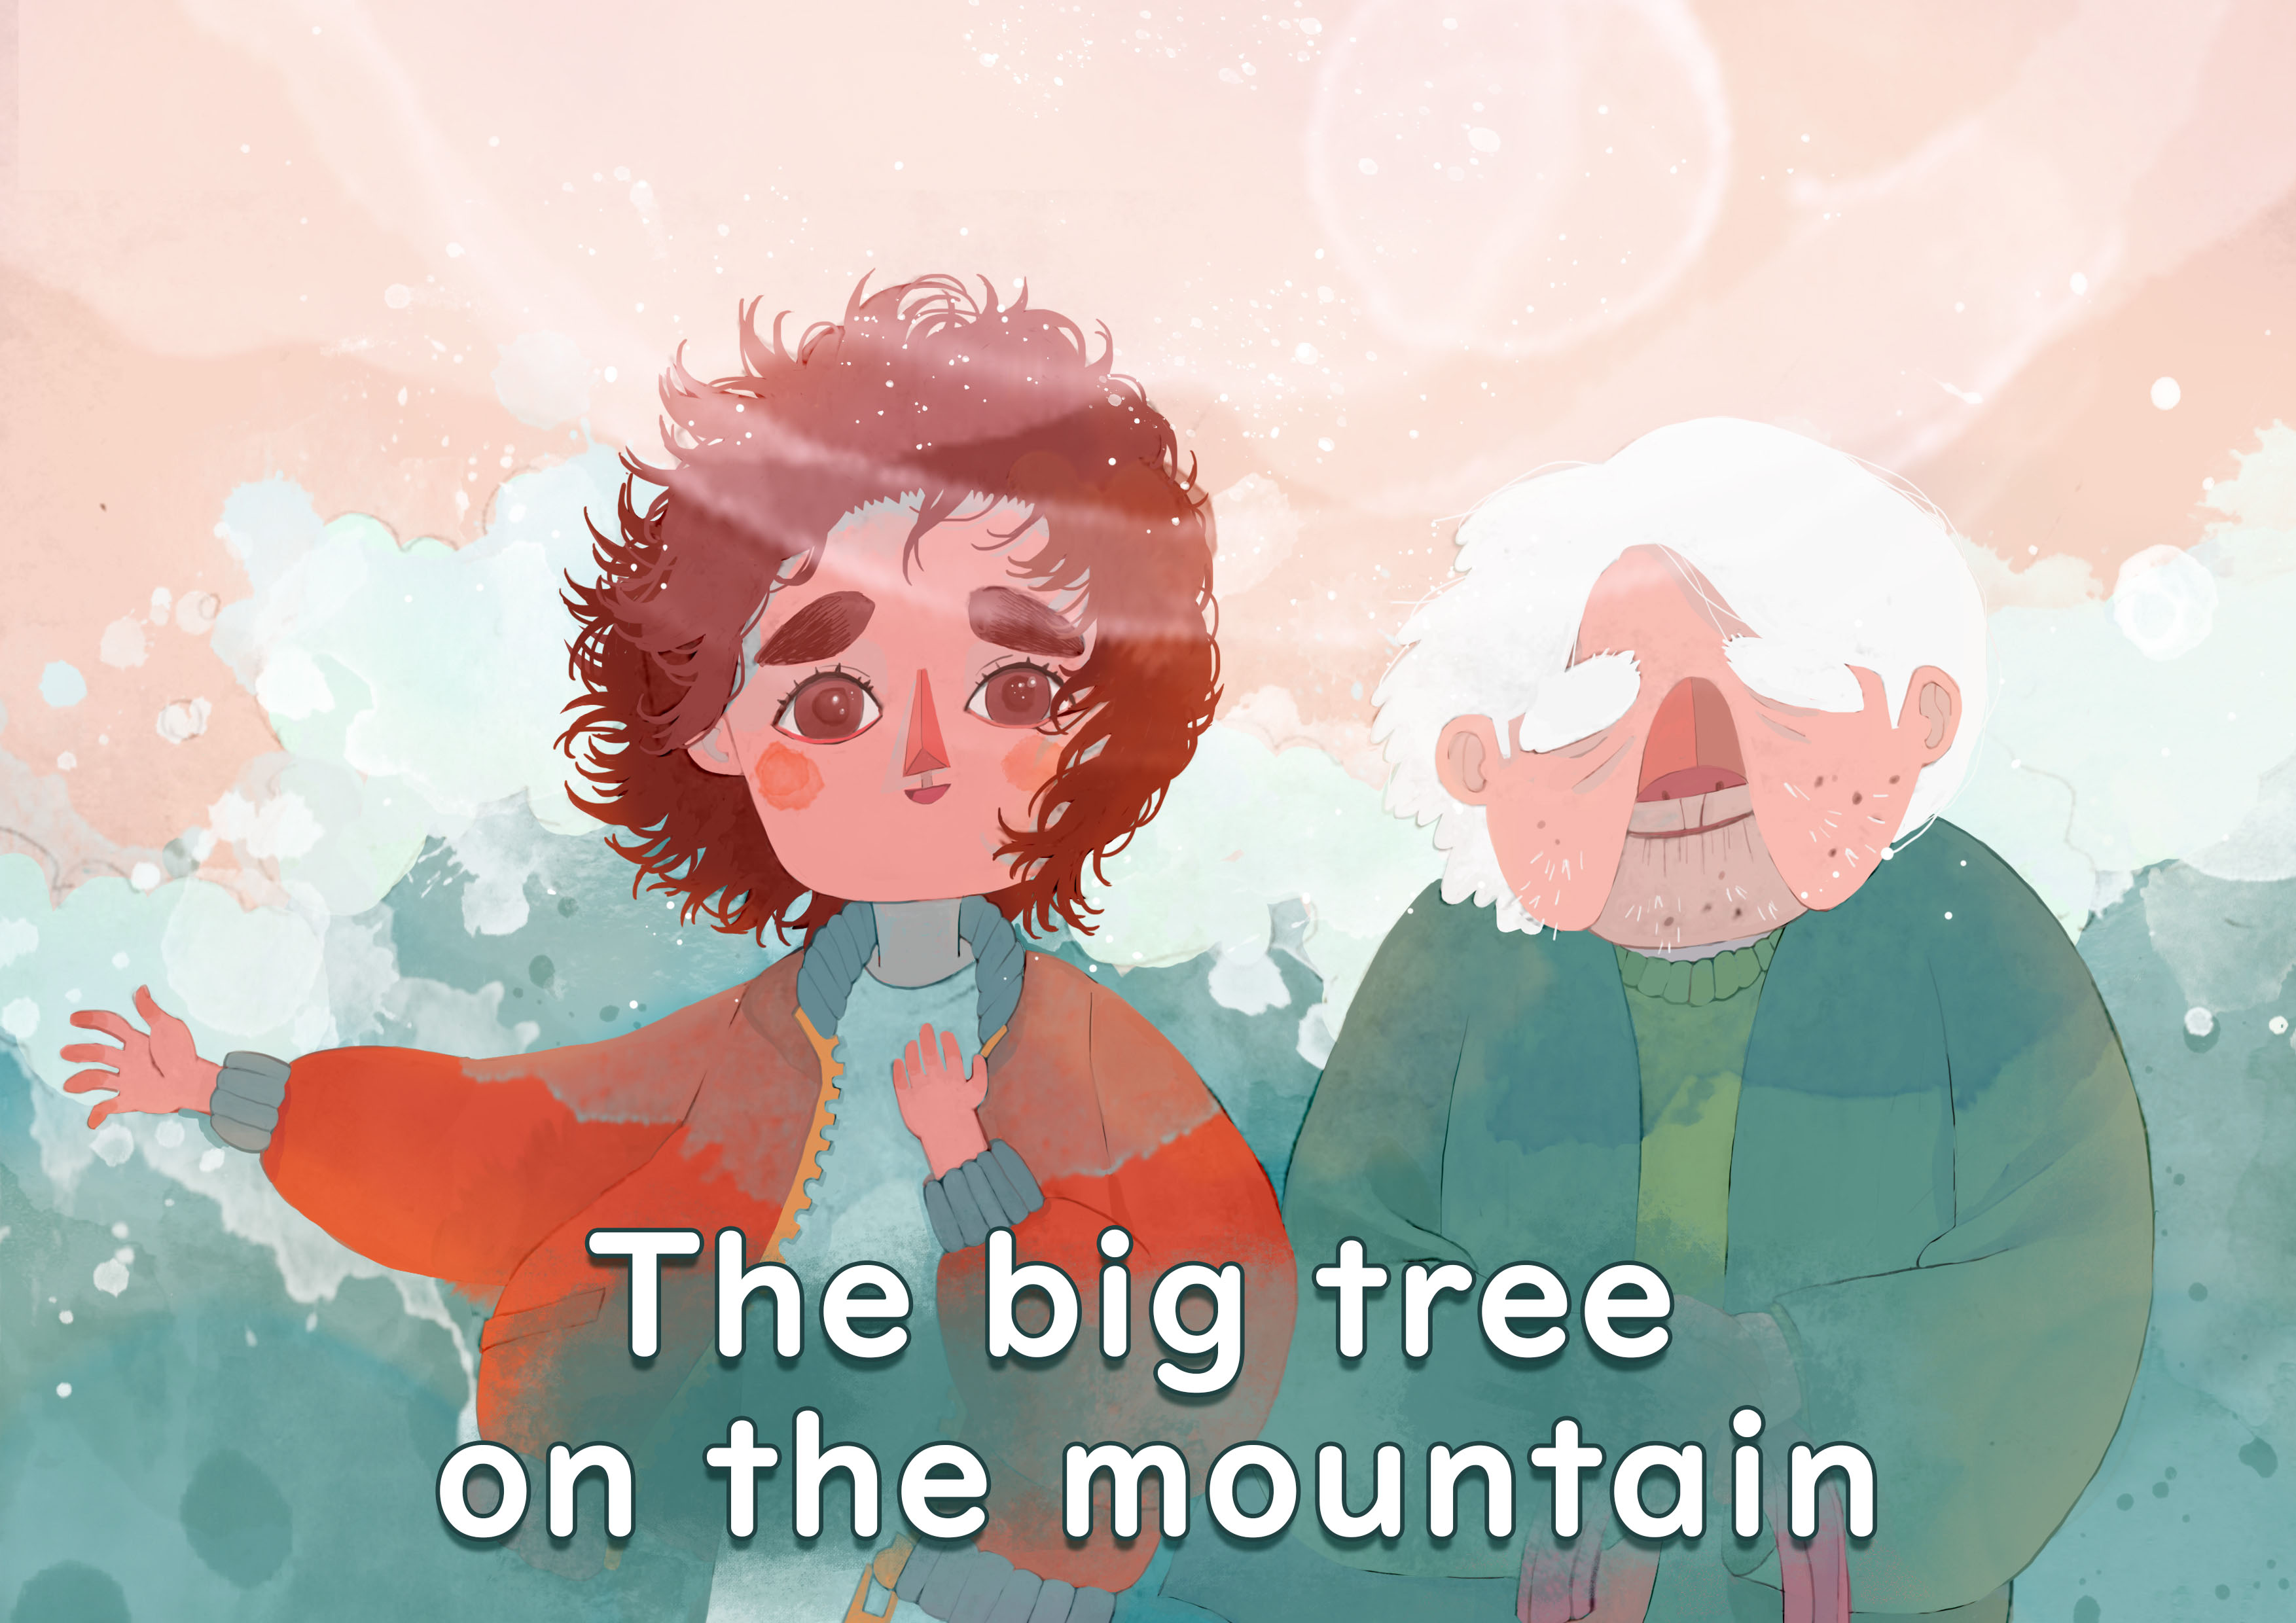 The big tree on the mountain